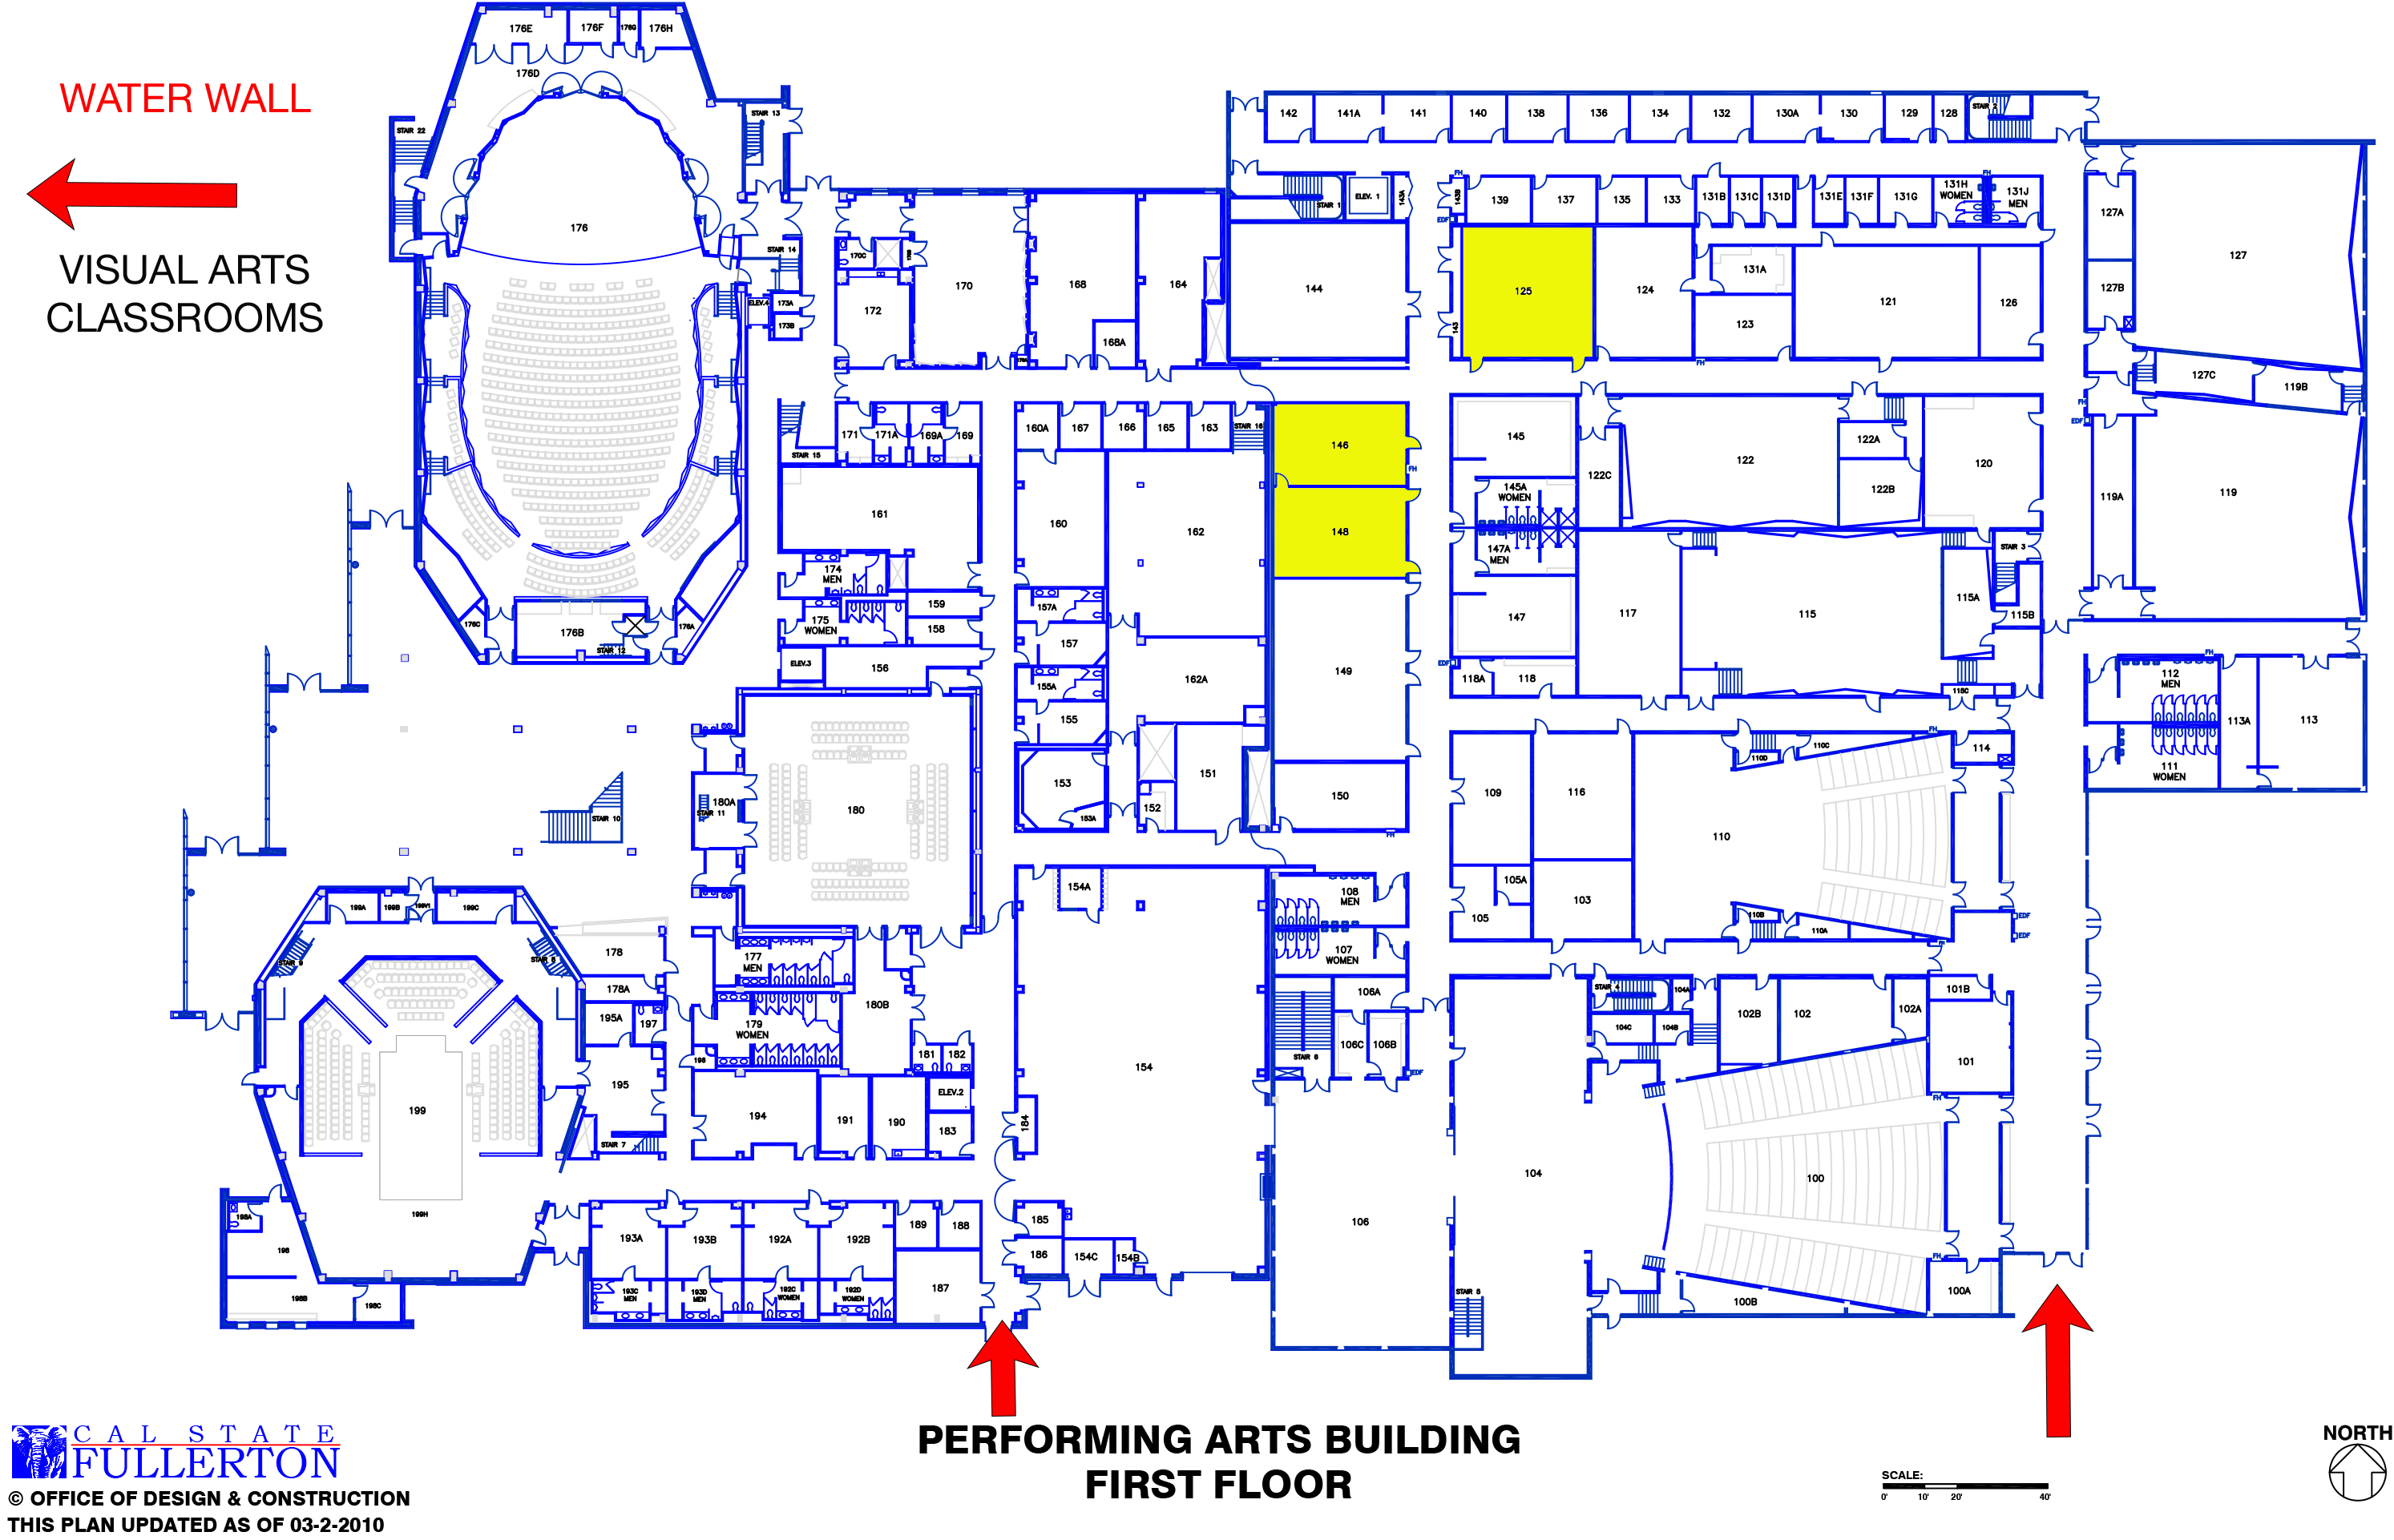 clayes performing arts center 1st floor map